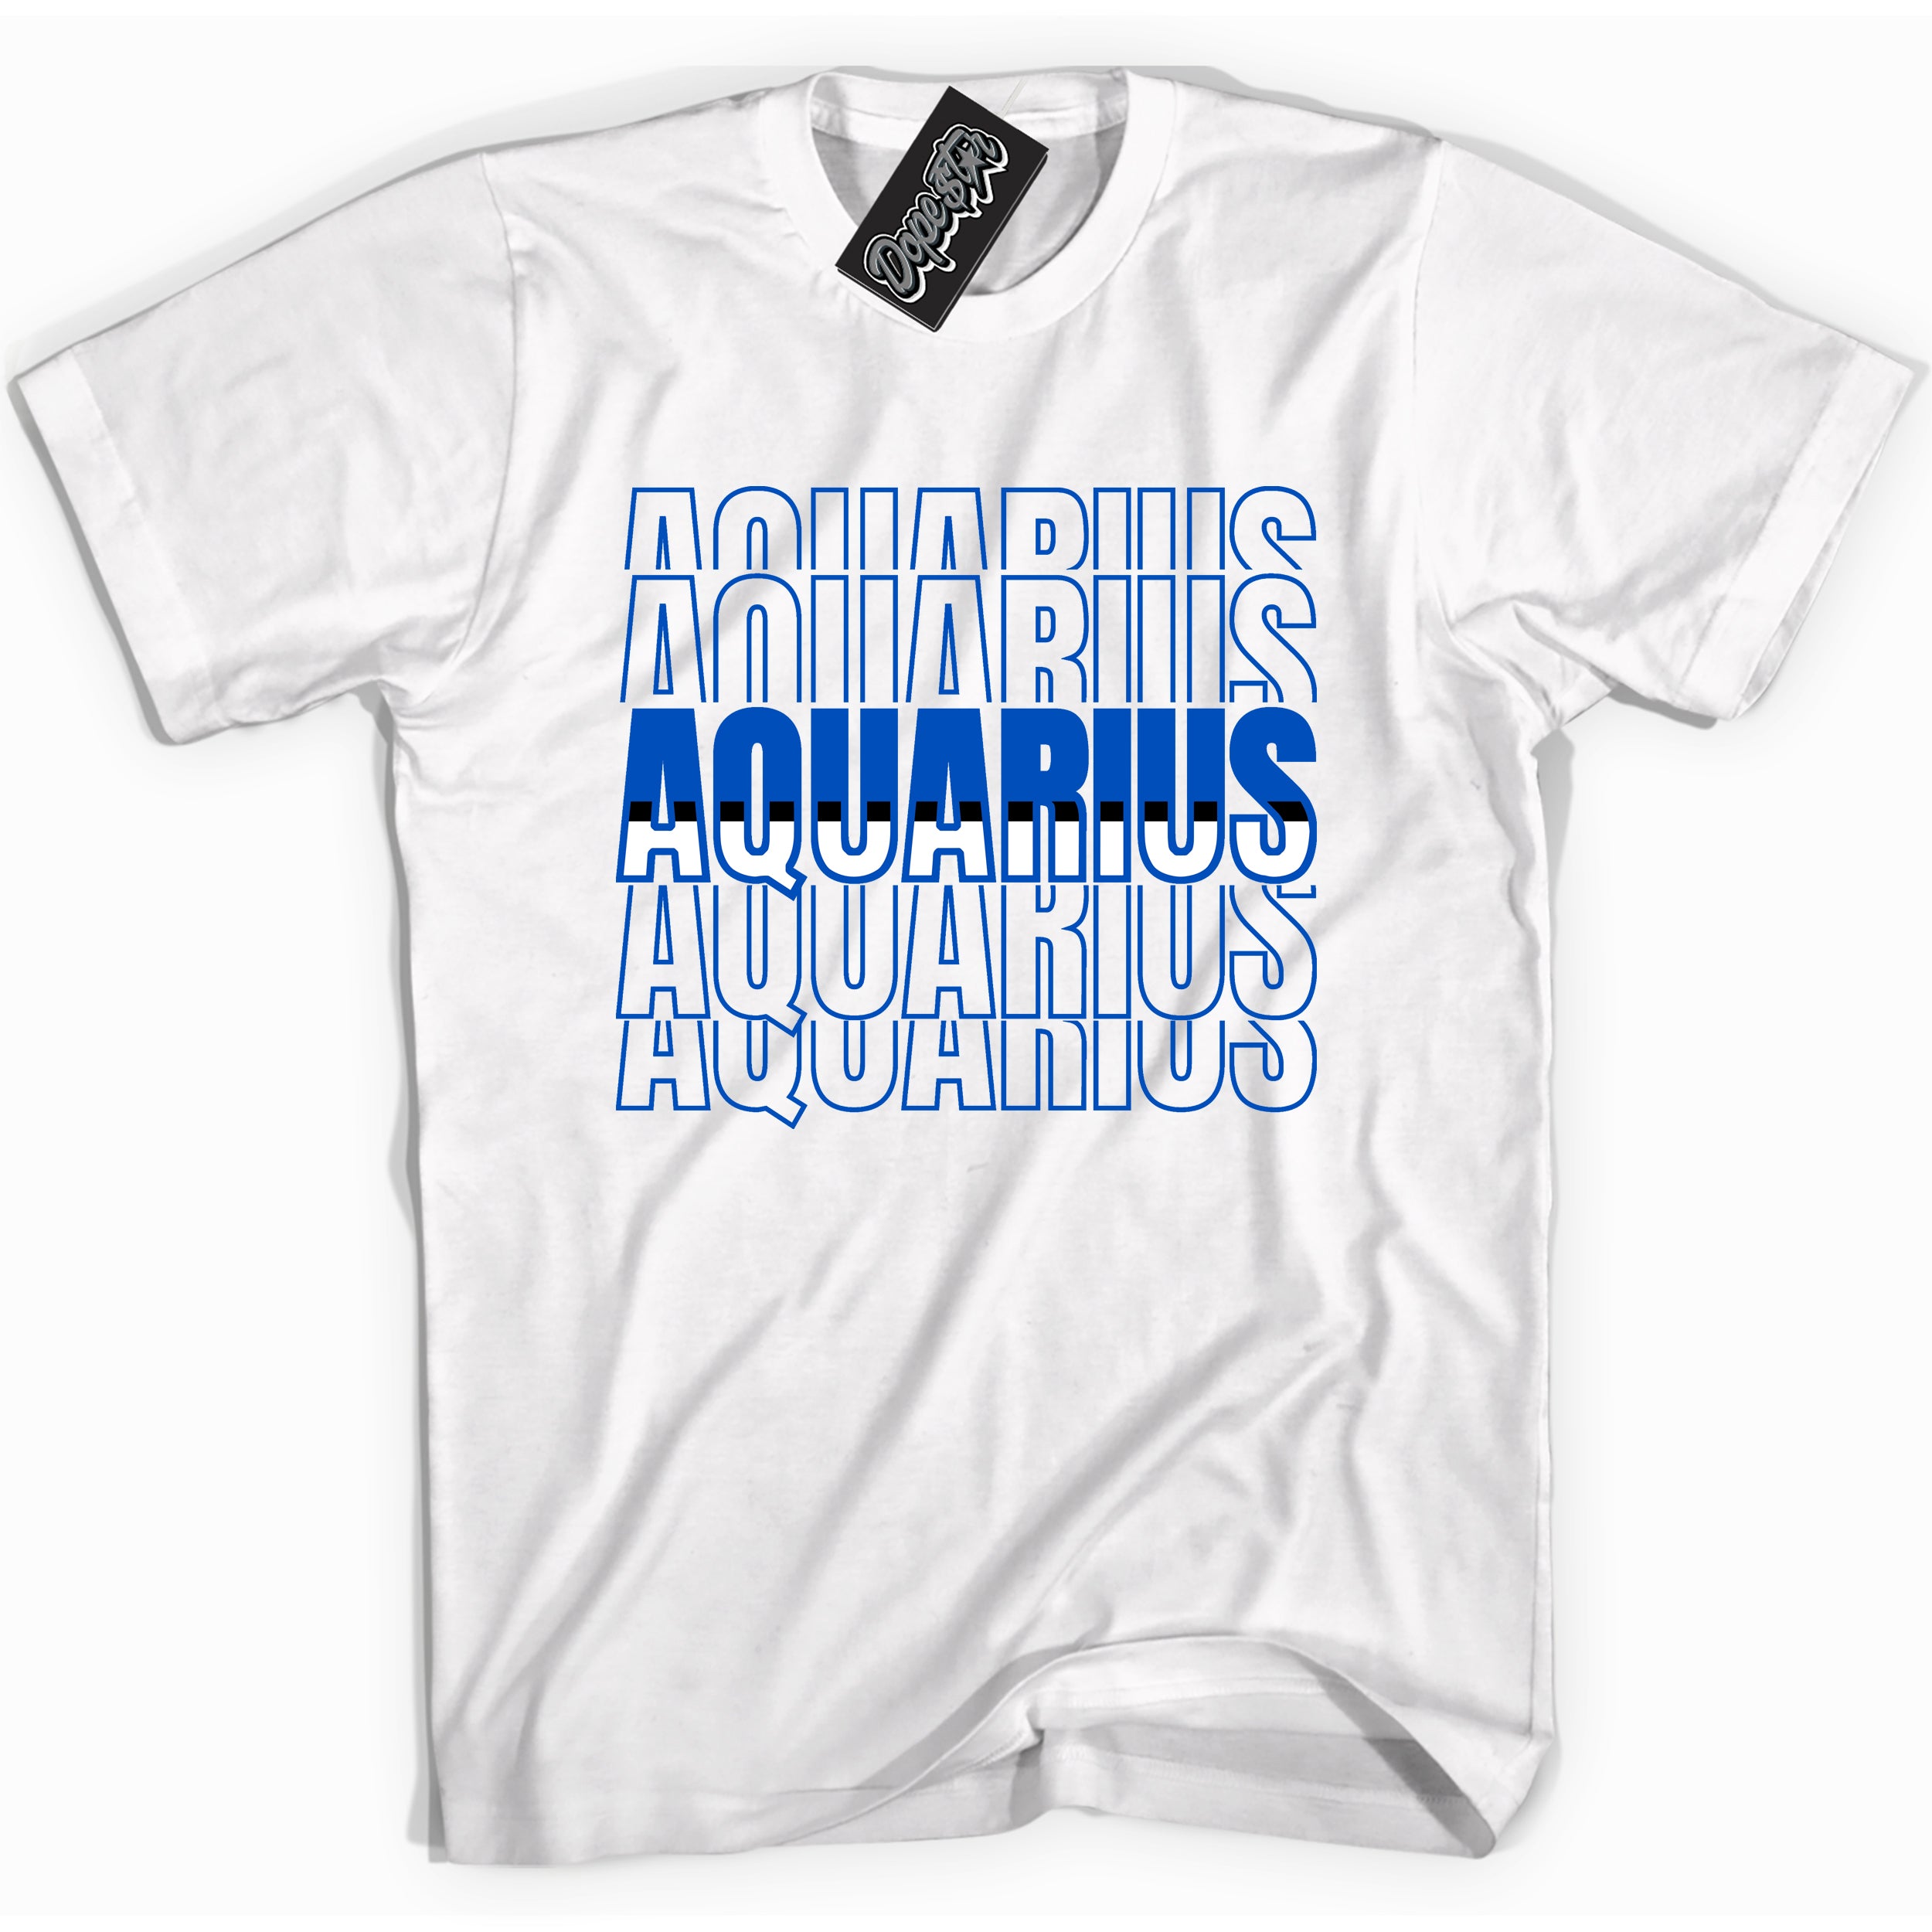 Cool White graphic tee with "Aquarius" design, that perfectly matches Royal Reimagined 1s sneakers 